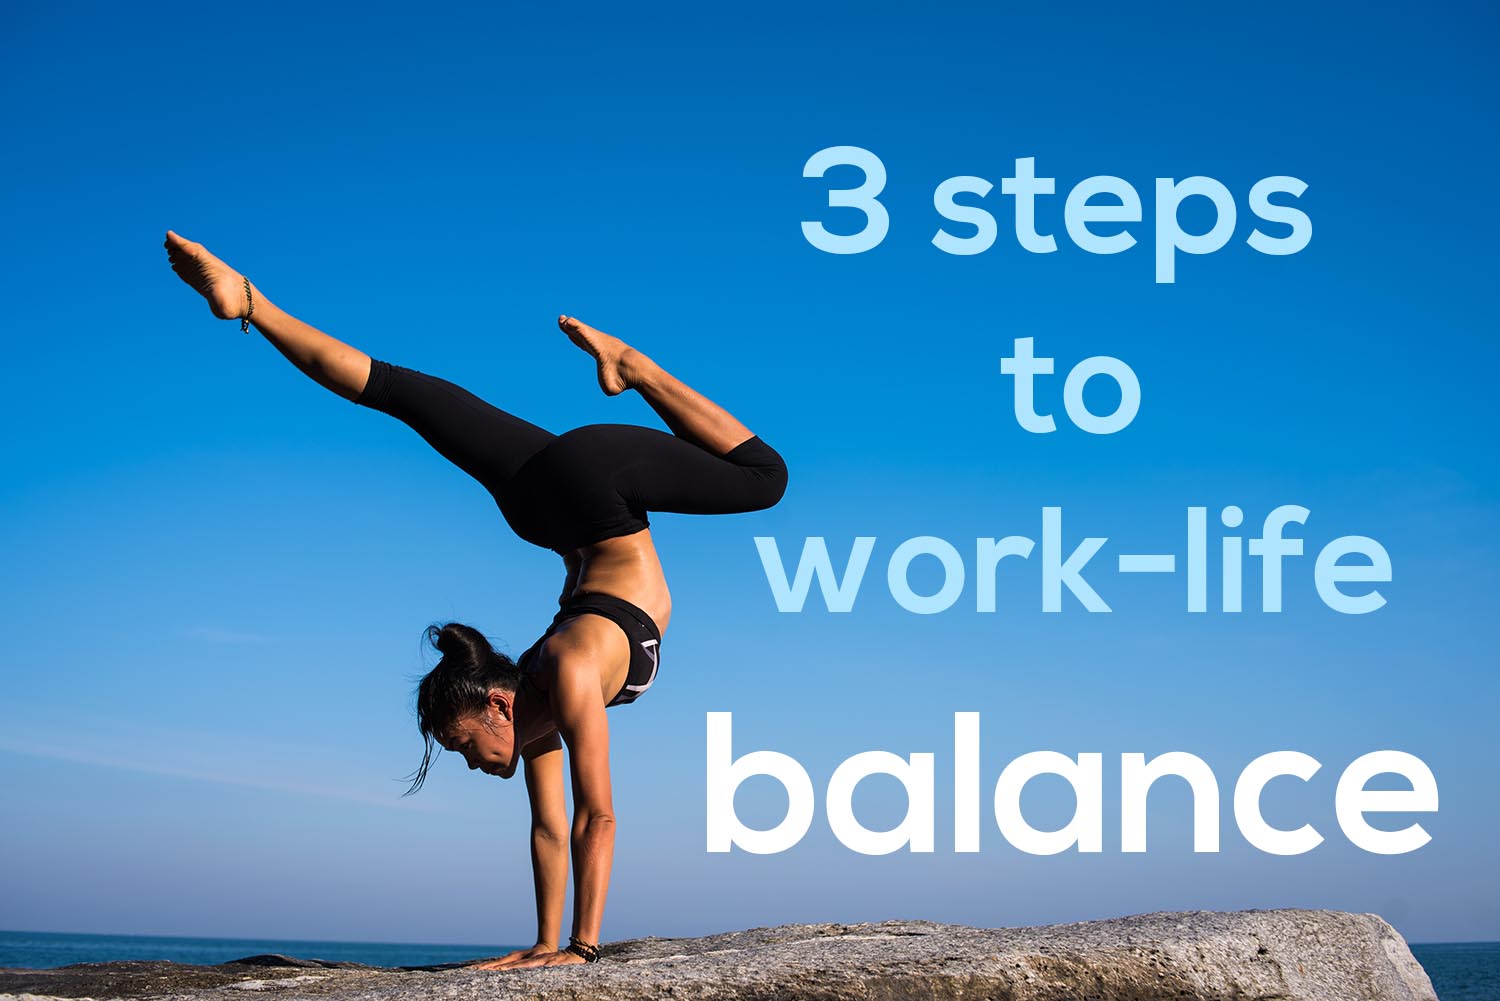 3 Steps to Work-Life Balance by Roxanne Williams